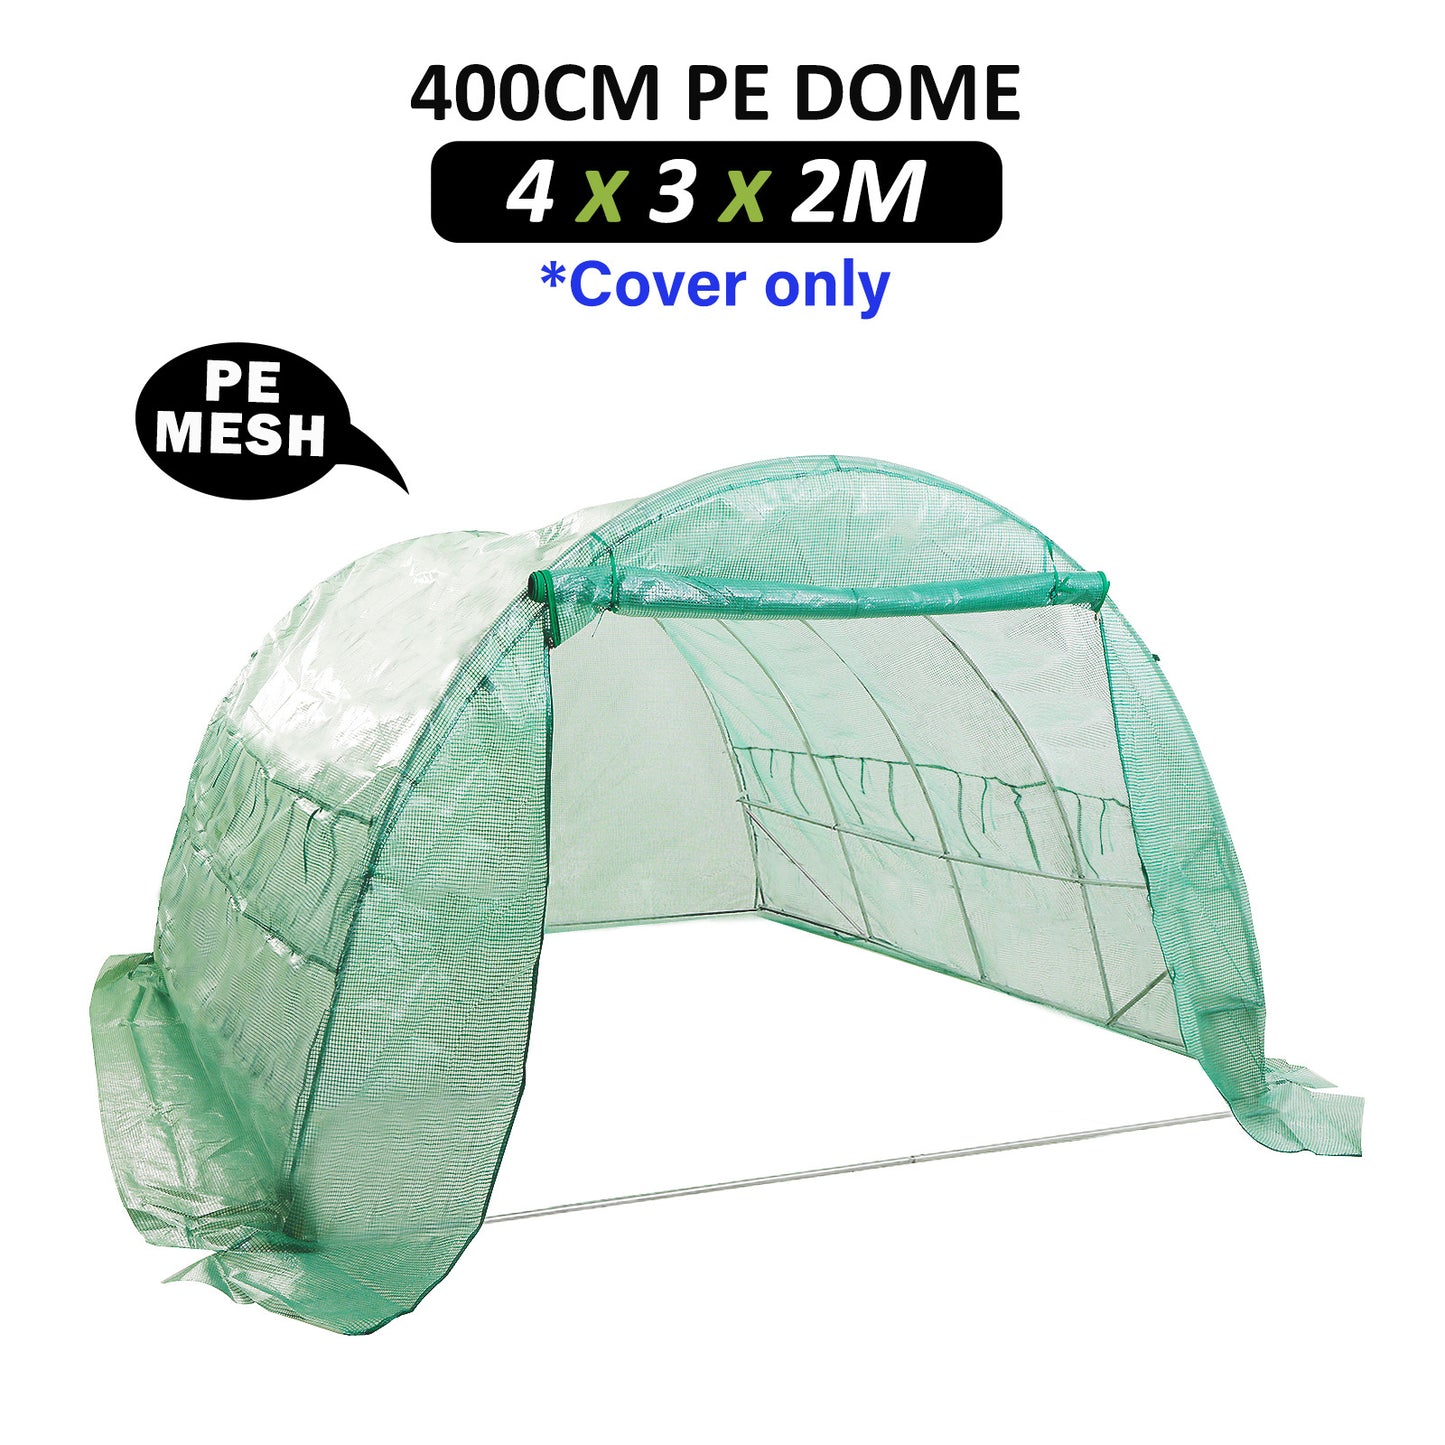 Home Ready Dome Tunnel 400cm Garden Greenhouse Shed PE Cover Only - image1